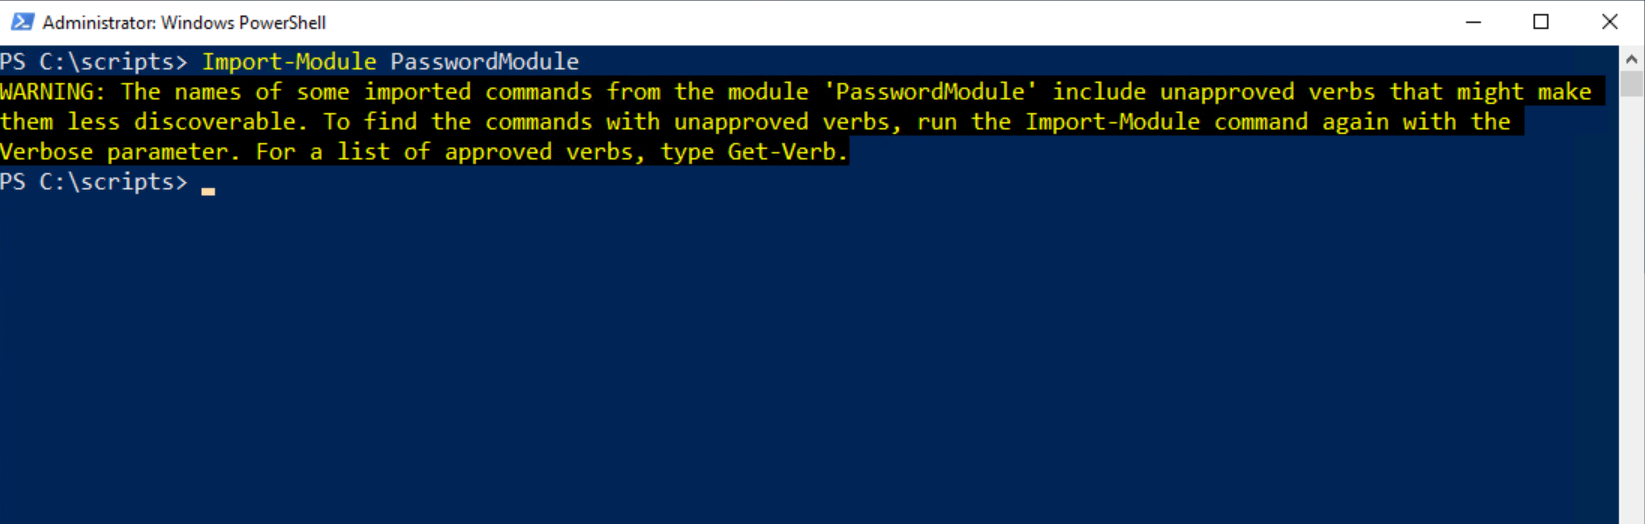 PowerShell showing an example of a warning message after entering Import-Module PasswordModule command